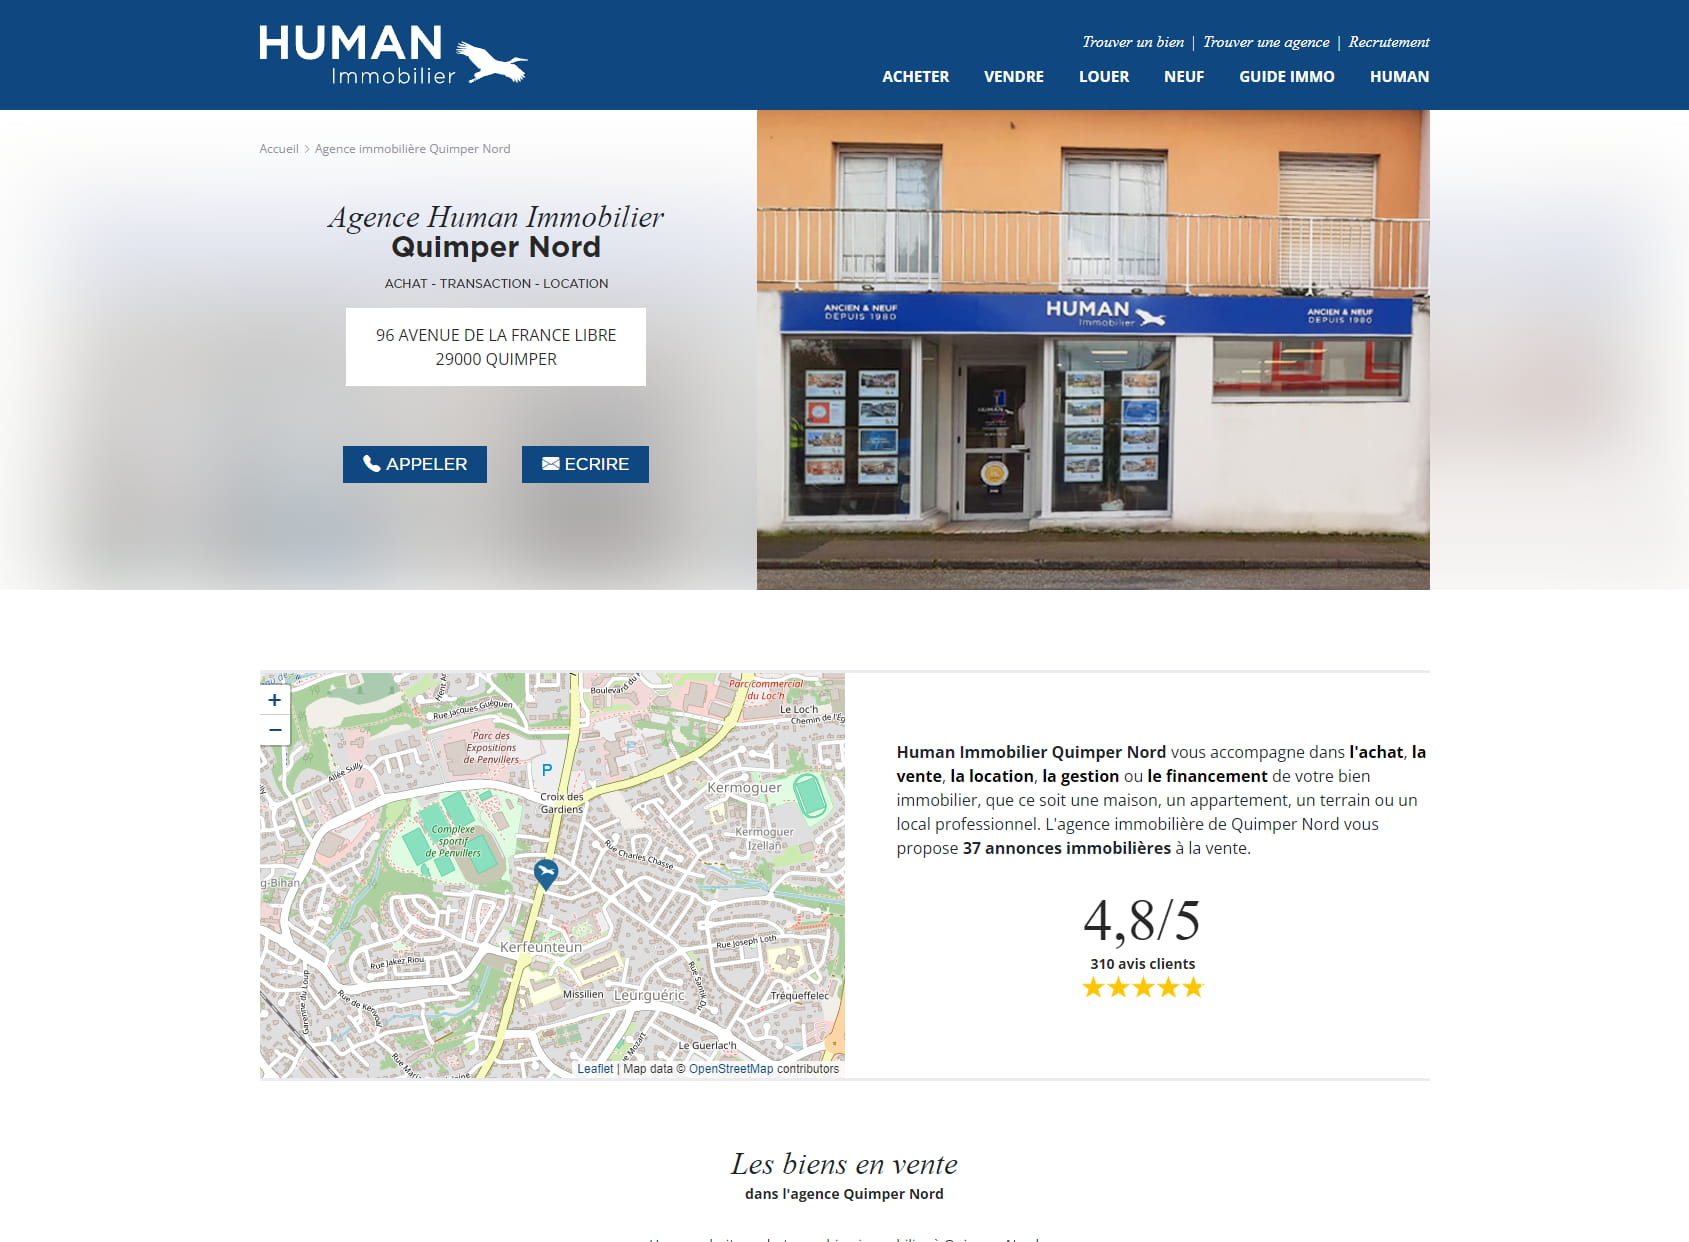 Human Immobilier Quimper Nord